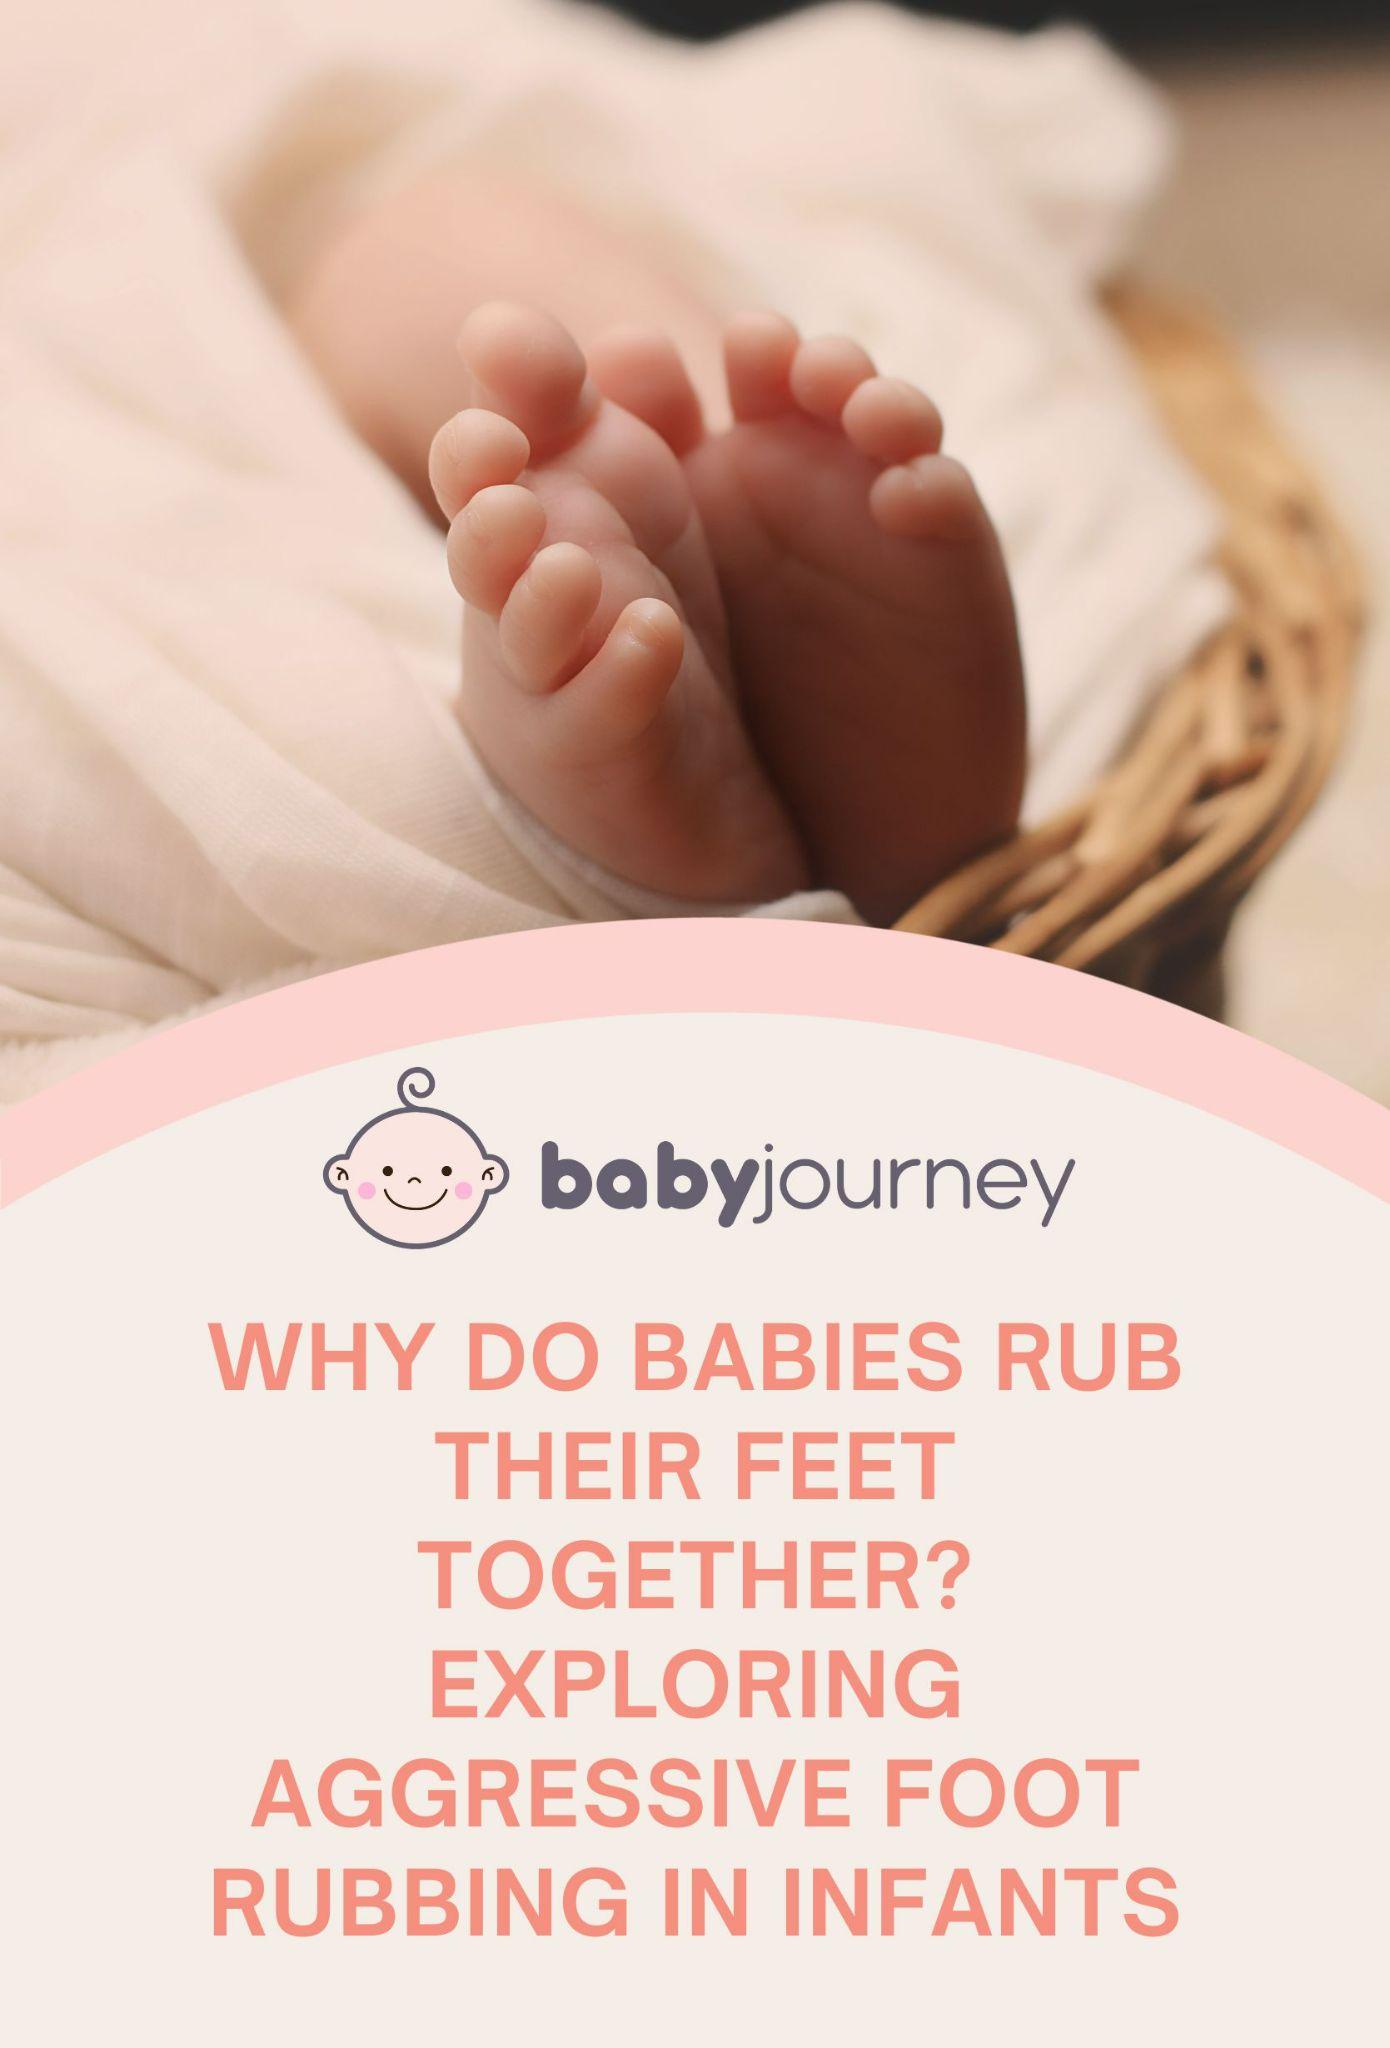 Why Do Babies Rub Their Feet Together? Exploring Aggressive Foot Rubbing in Infants Pinterest Image - Baby Journey 